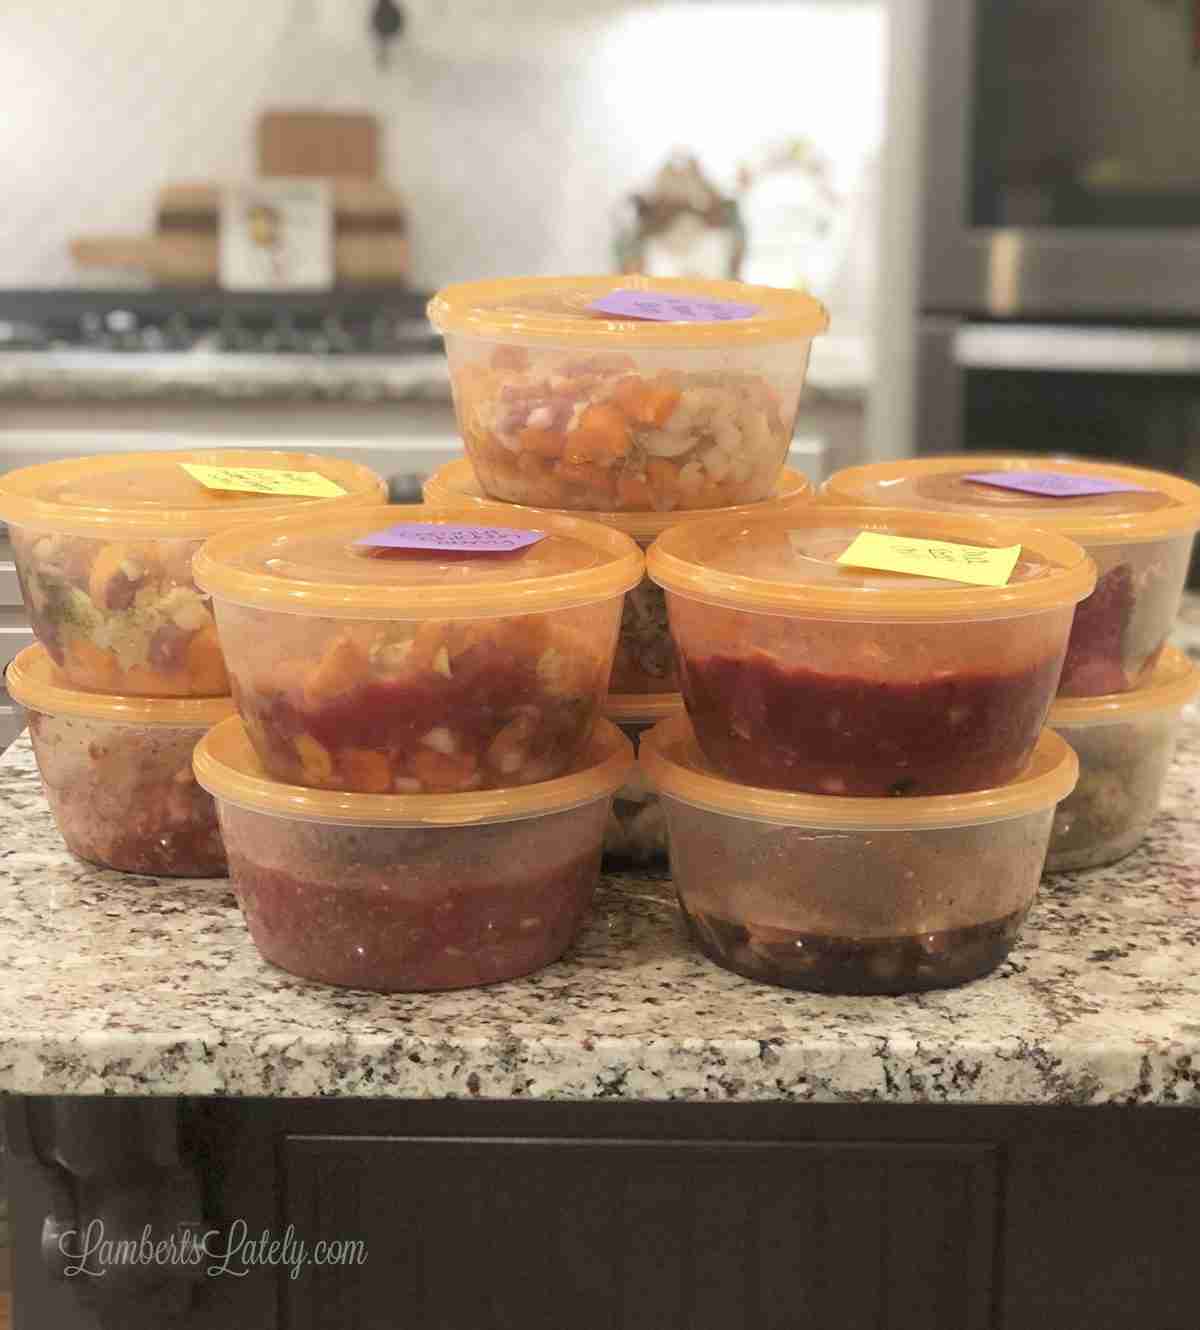 freezer meals in containers stacked on a counter.